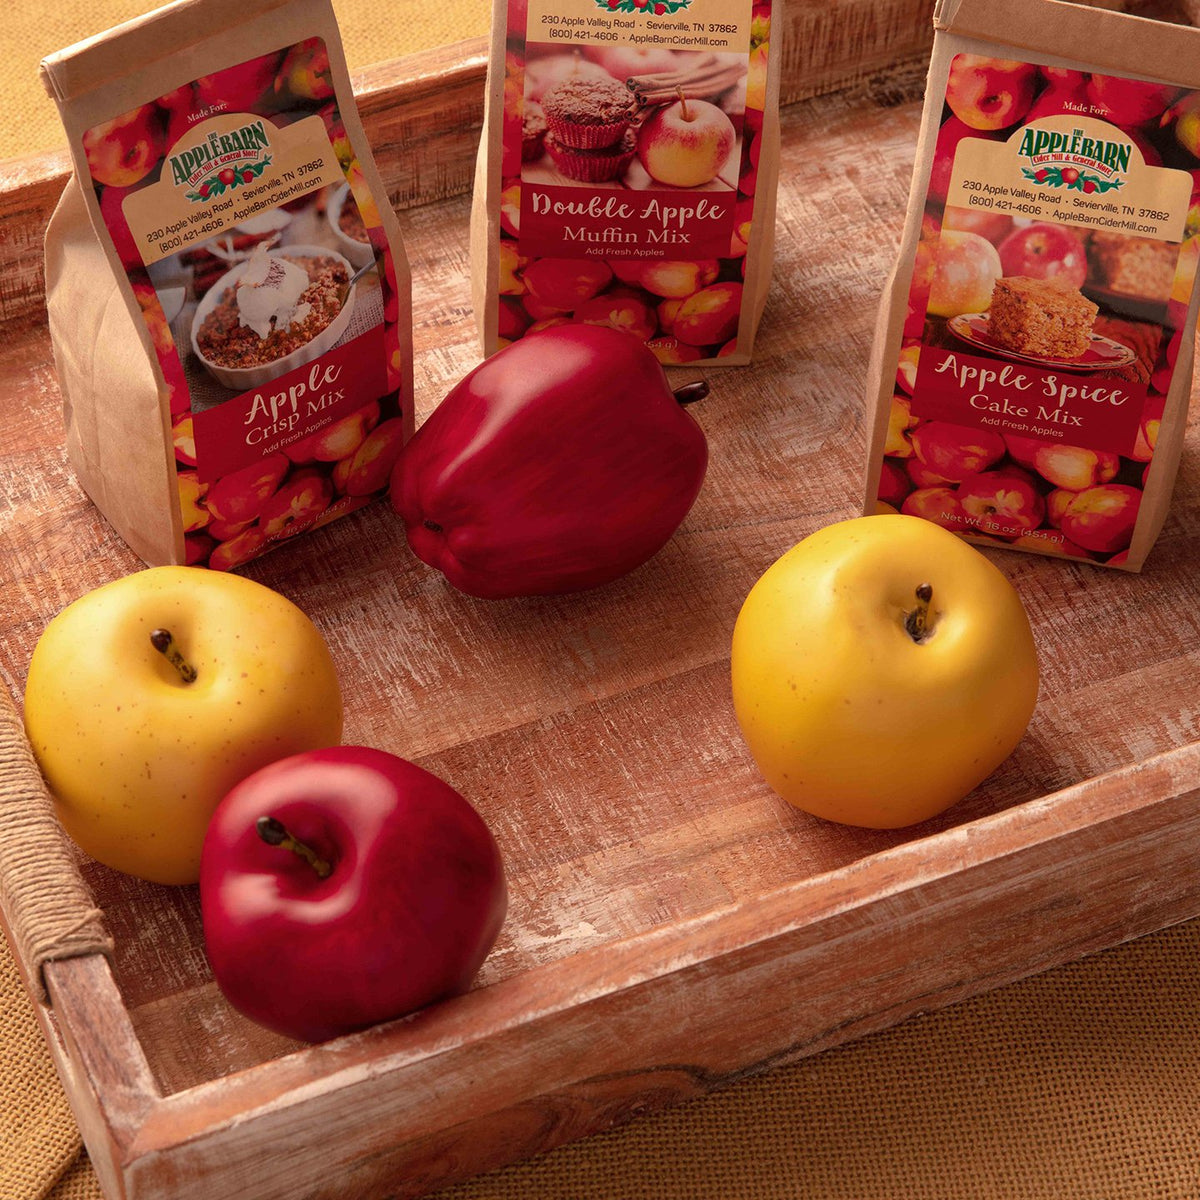 Cake mix bags with apples